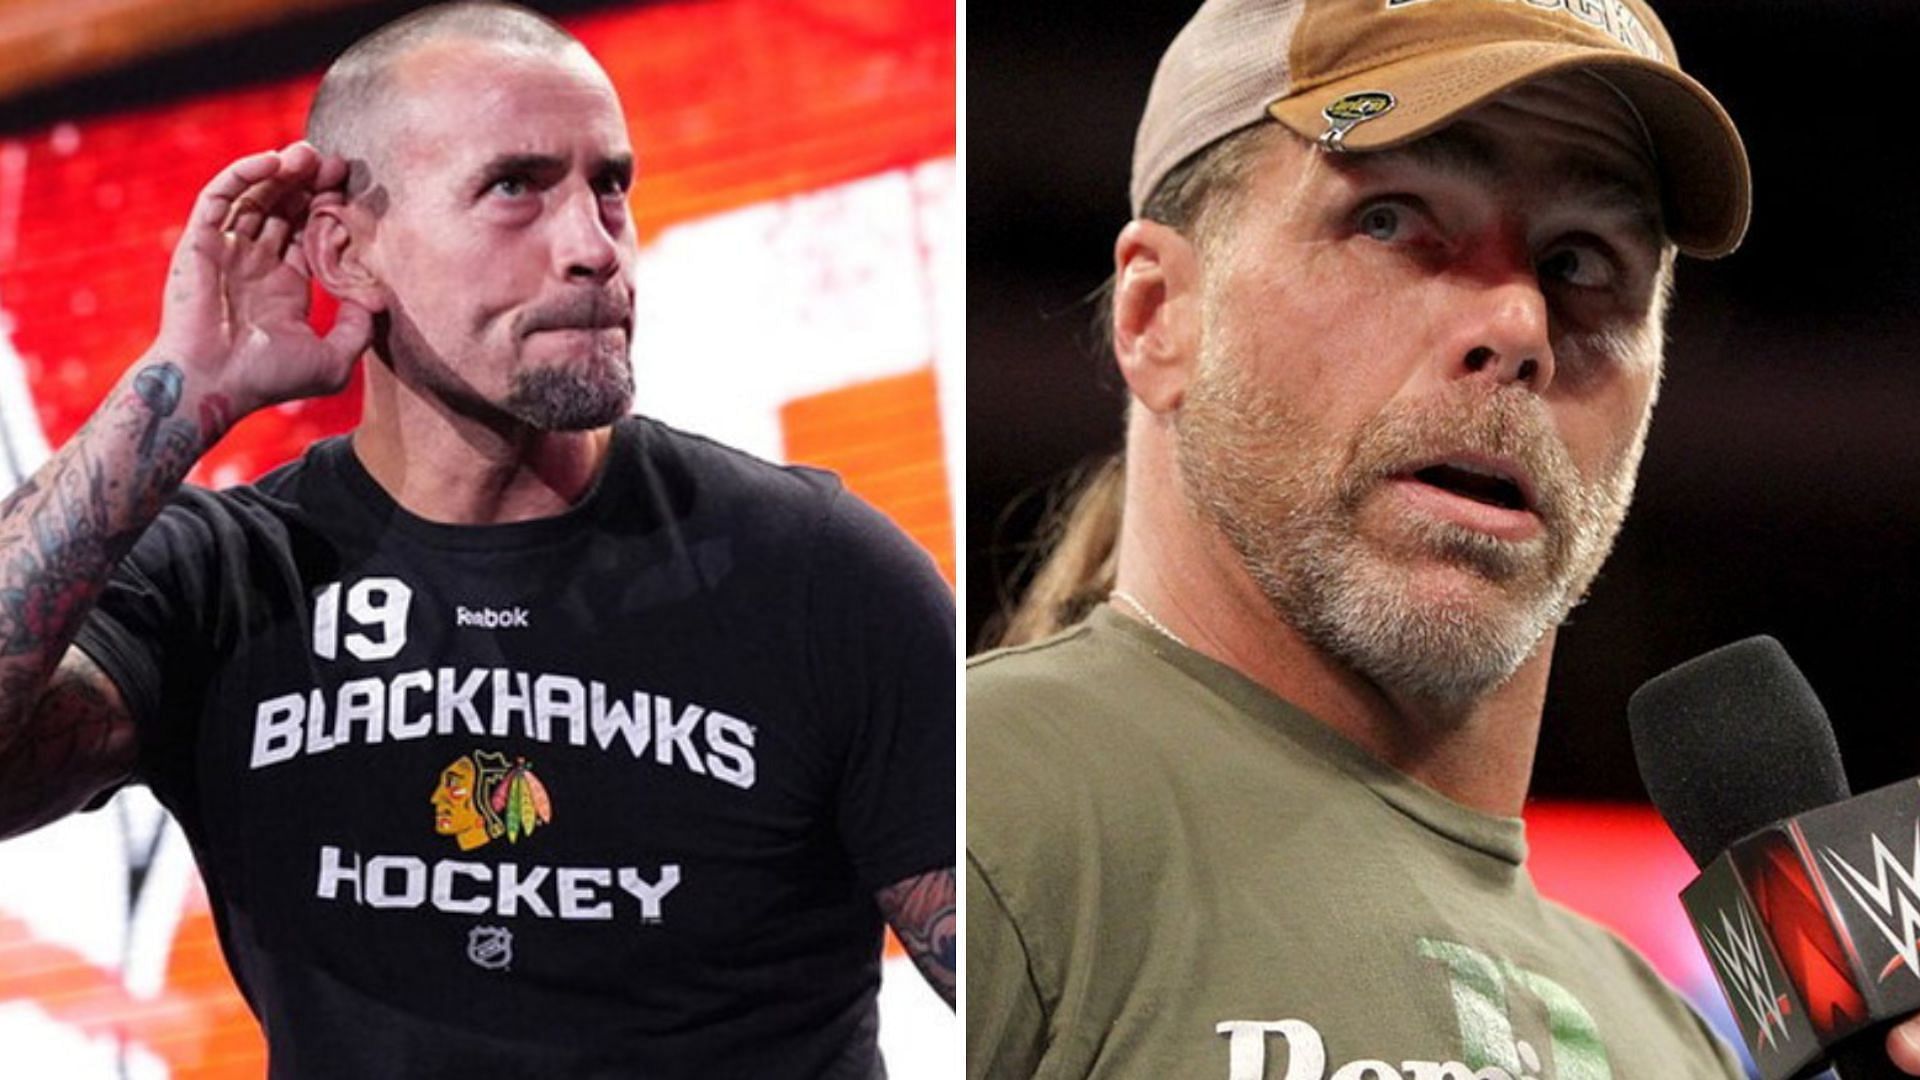 CM Punk (left) and WWE Hall of Famer Shawn Michaels (right)